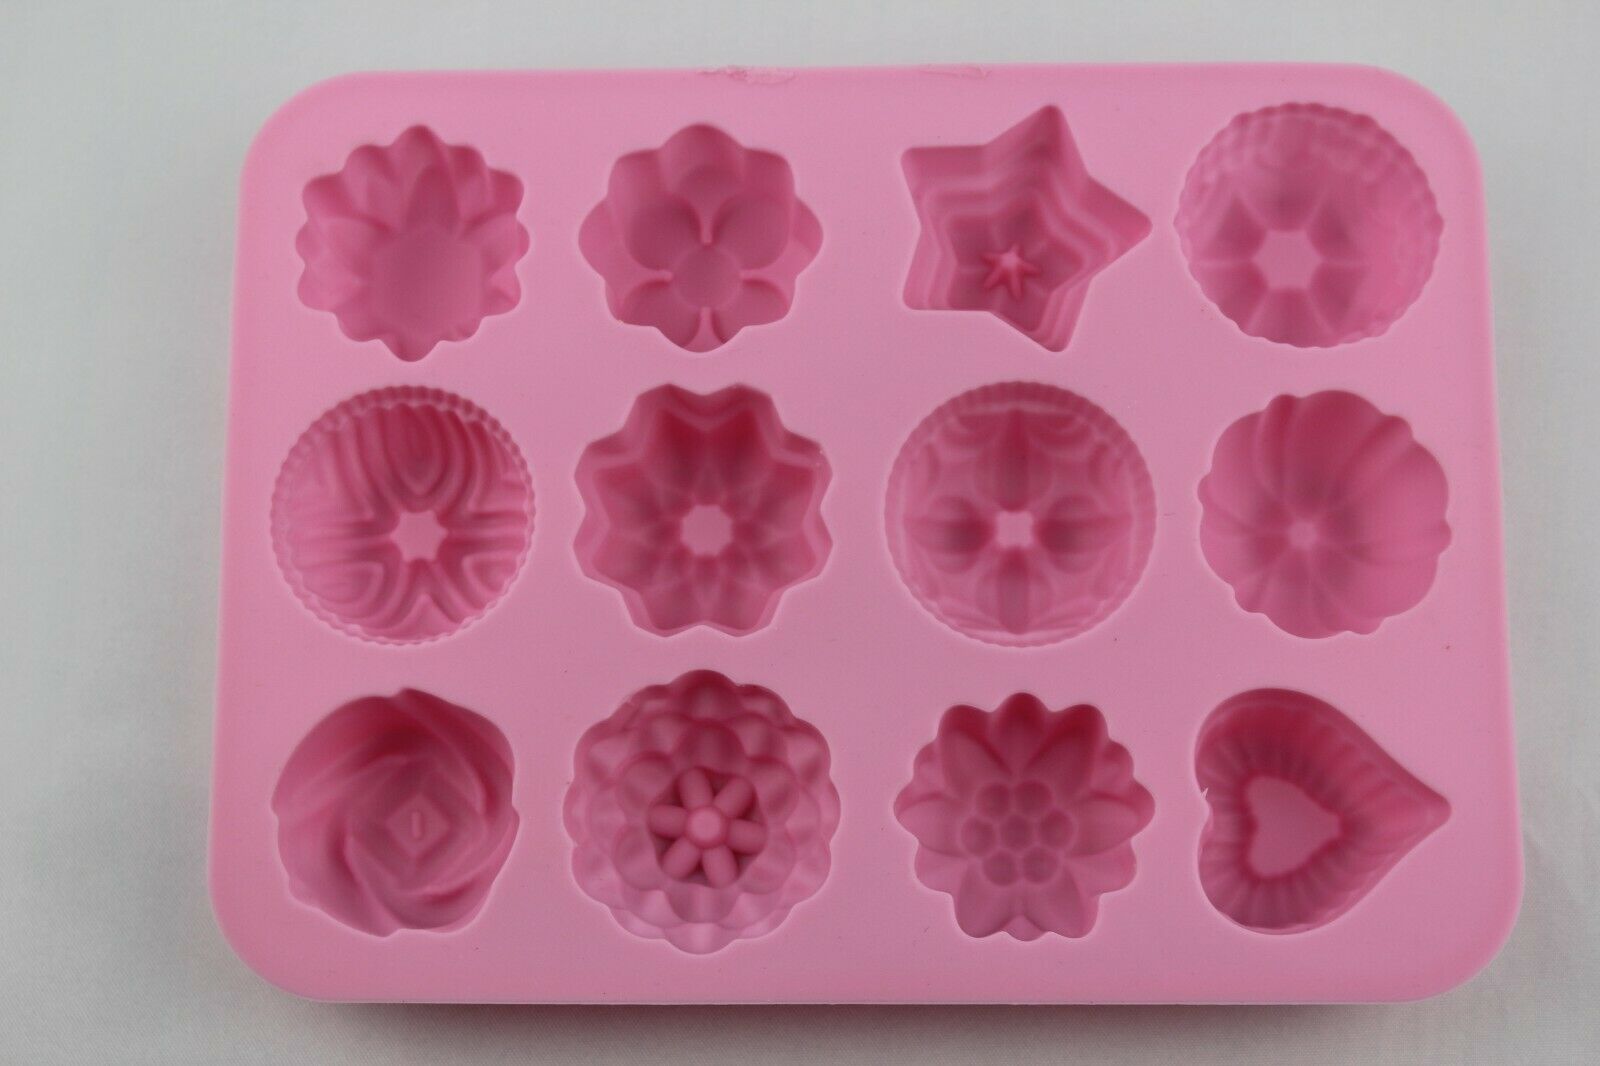 attachment-https://www.cupcakeaddicts.co.uk/wp-content/uploads/imported/8/12-Cell-Silicone-Various-Flowers-Star-Heart-Bunt-mould-Cake-Wax-Candle-Soap-324311985848-6.jpg